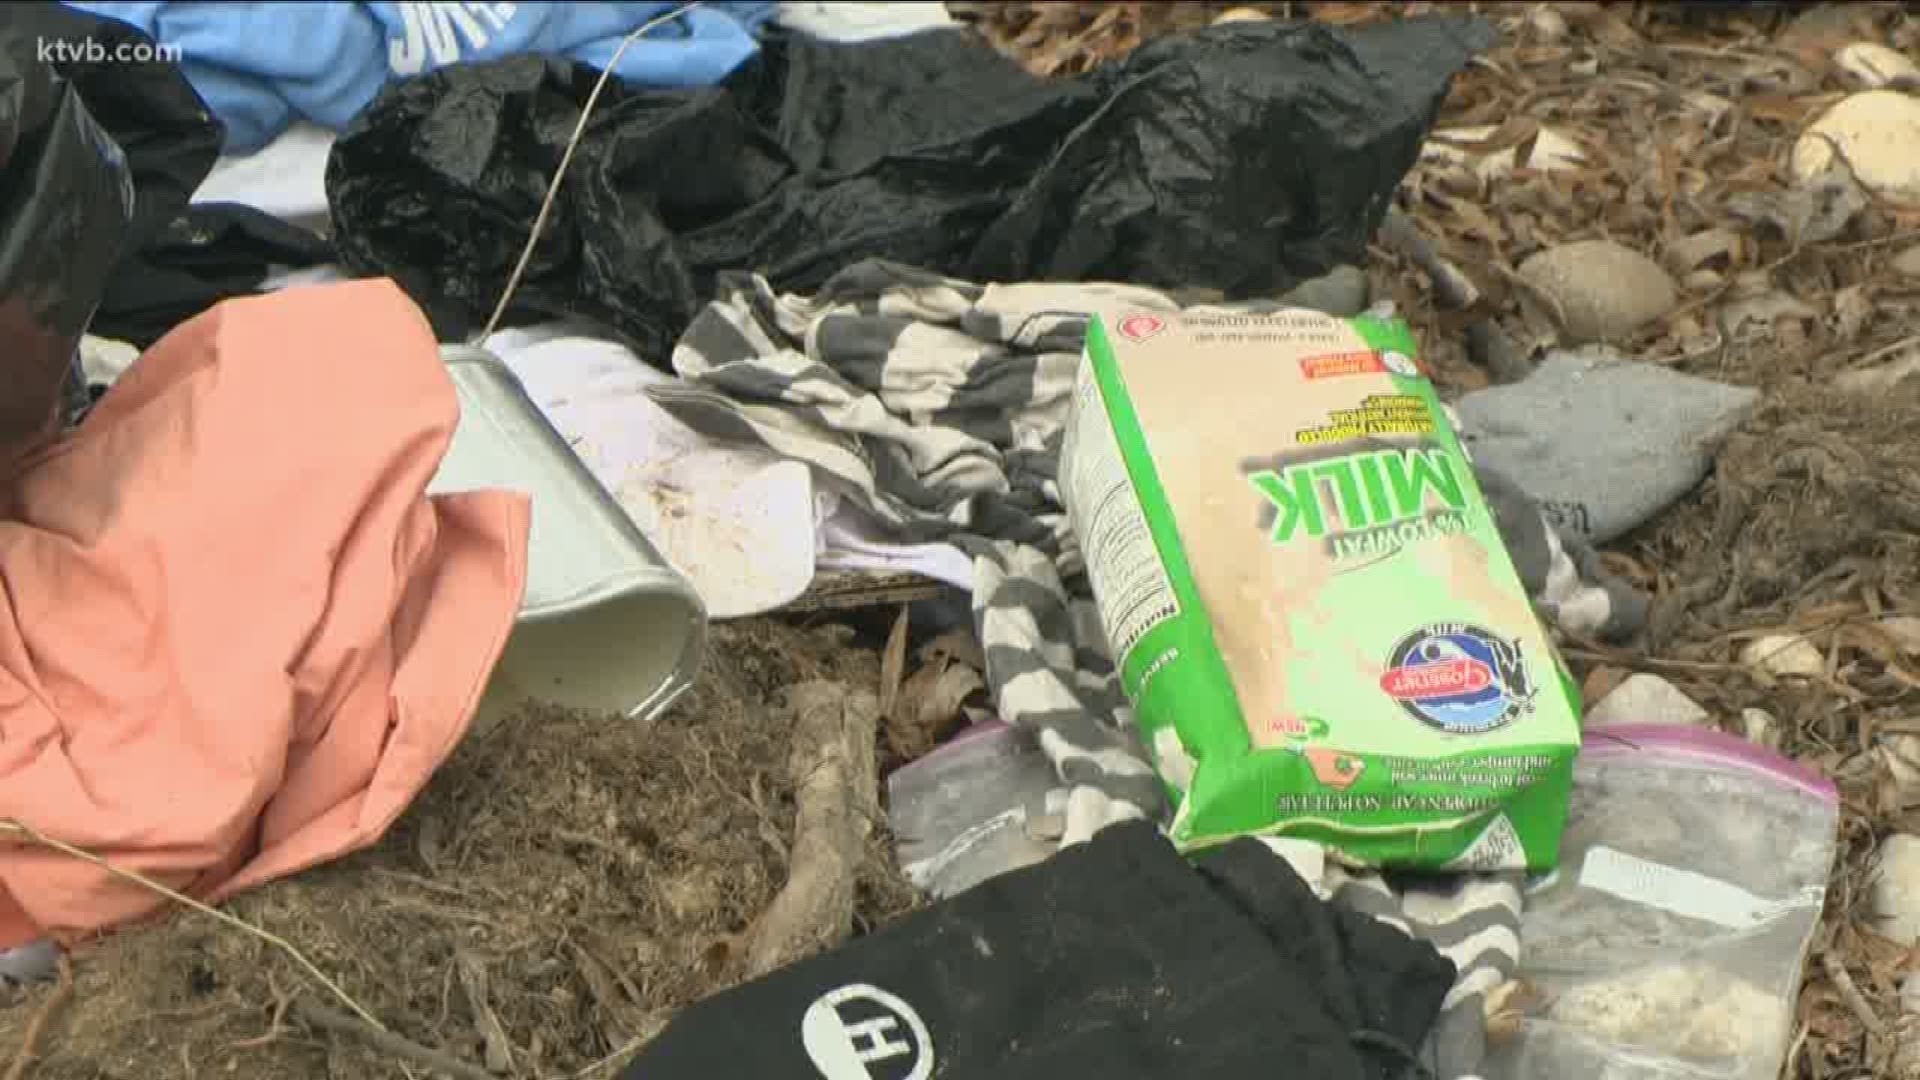 A Boise man noticed all the trash, contacted police and posted about it on social media.